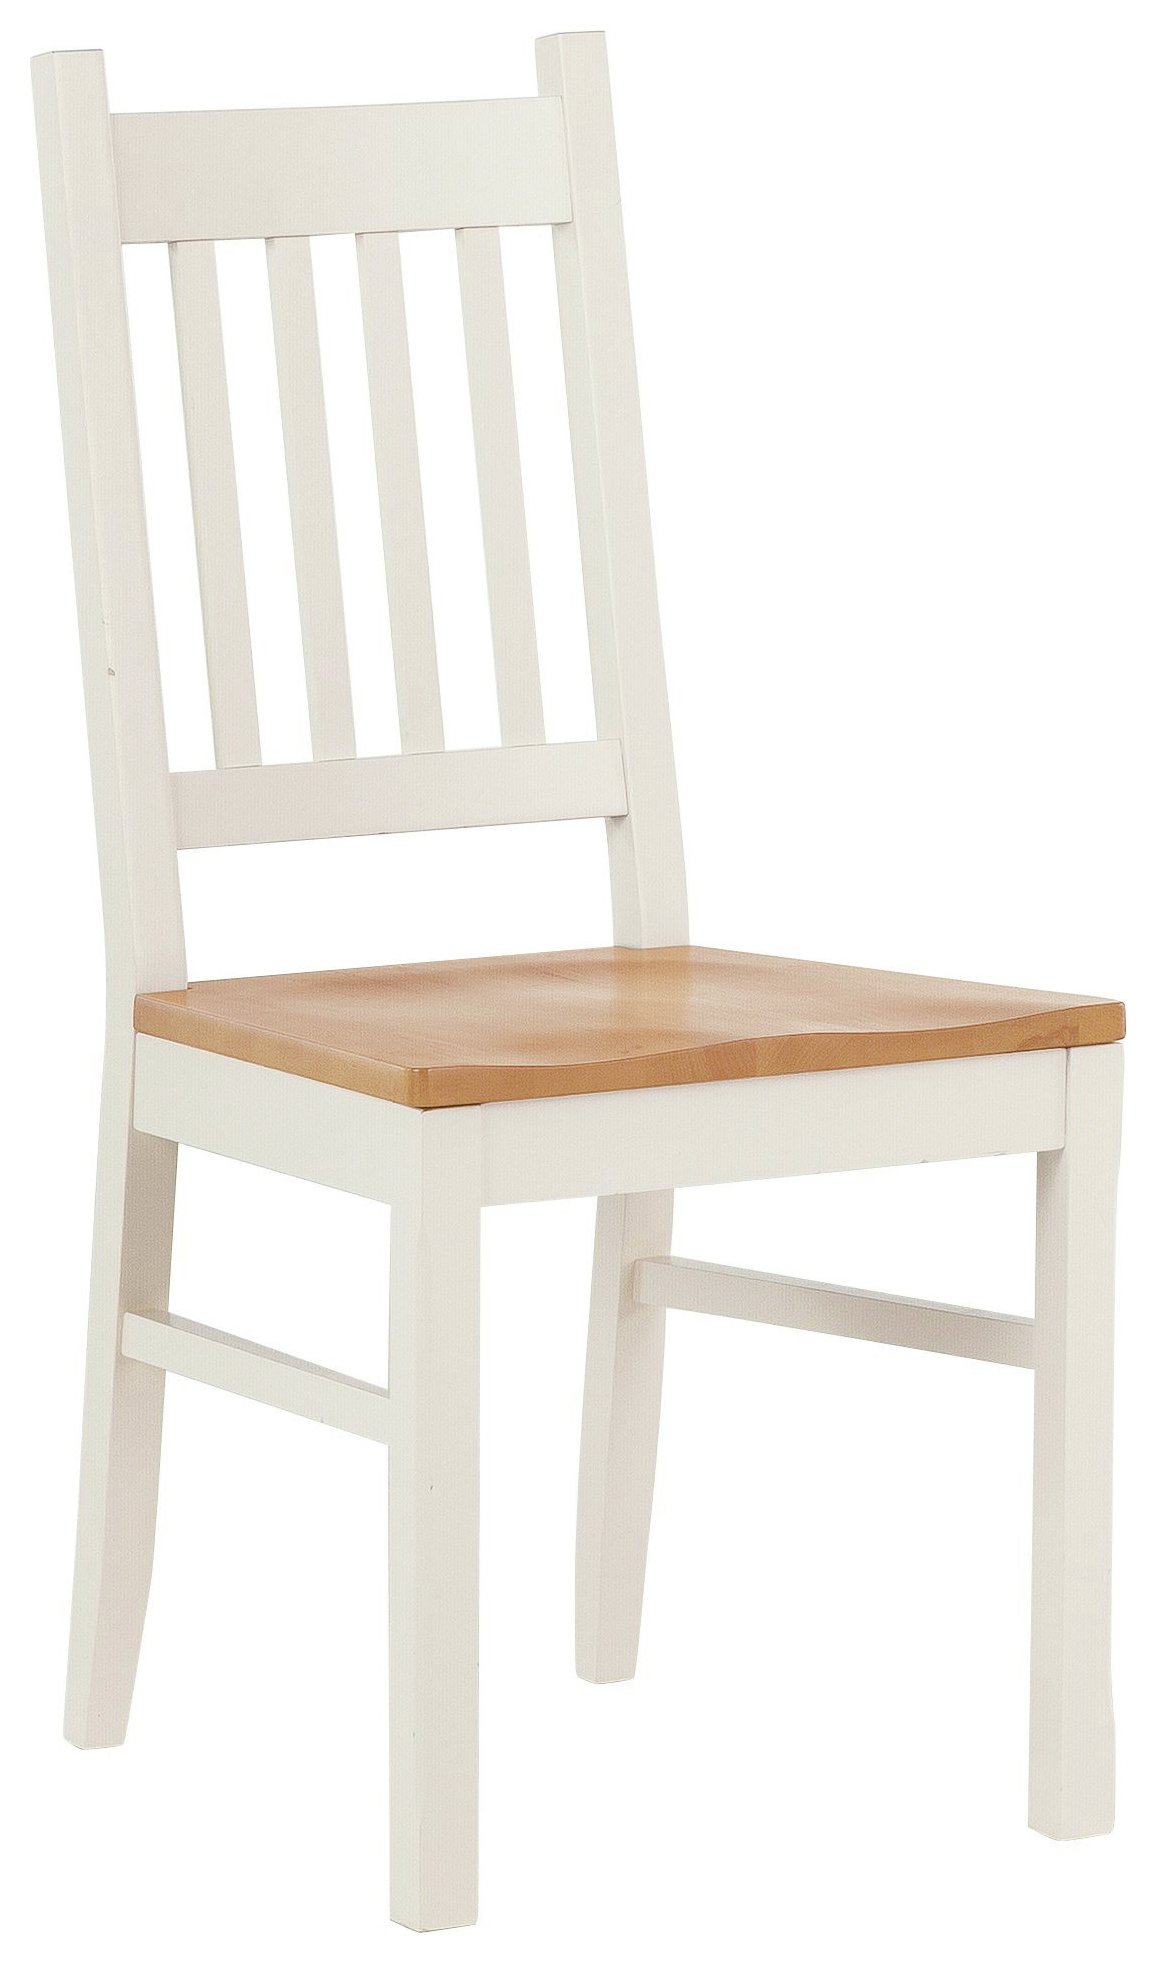 Buy Dining chairs at Argos.co.uk - Your Online Shop for Home and garden.